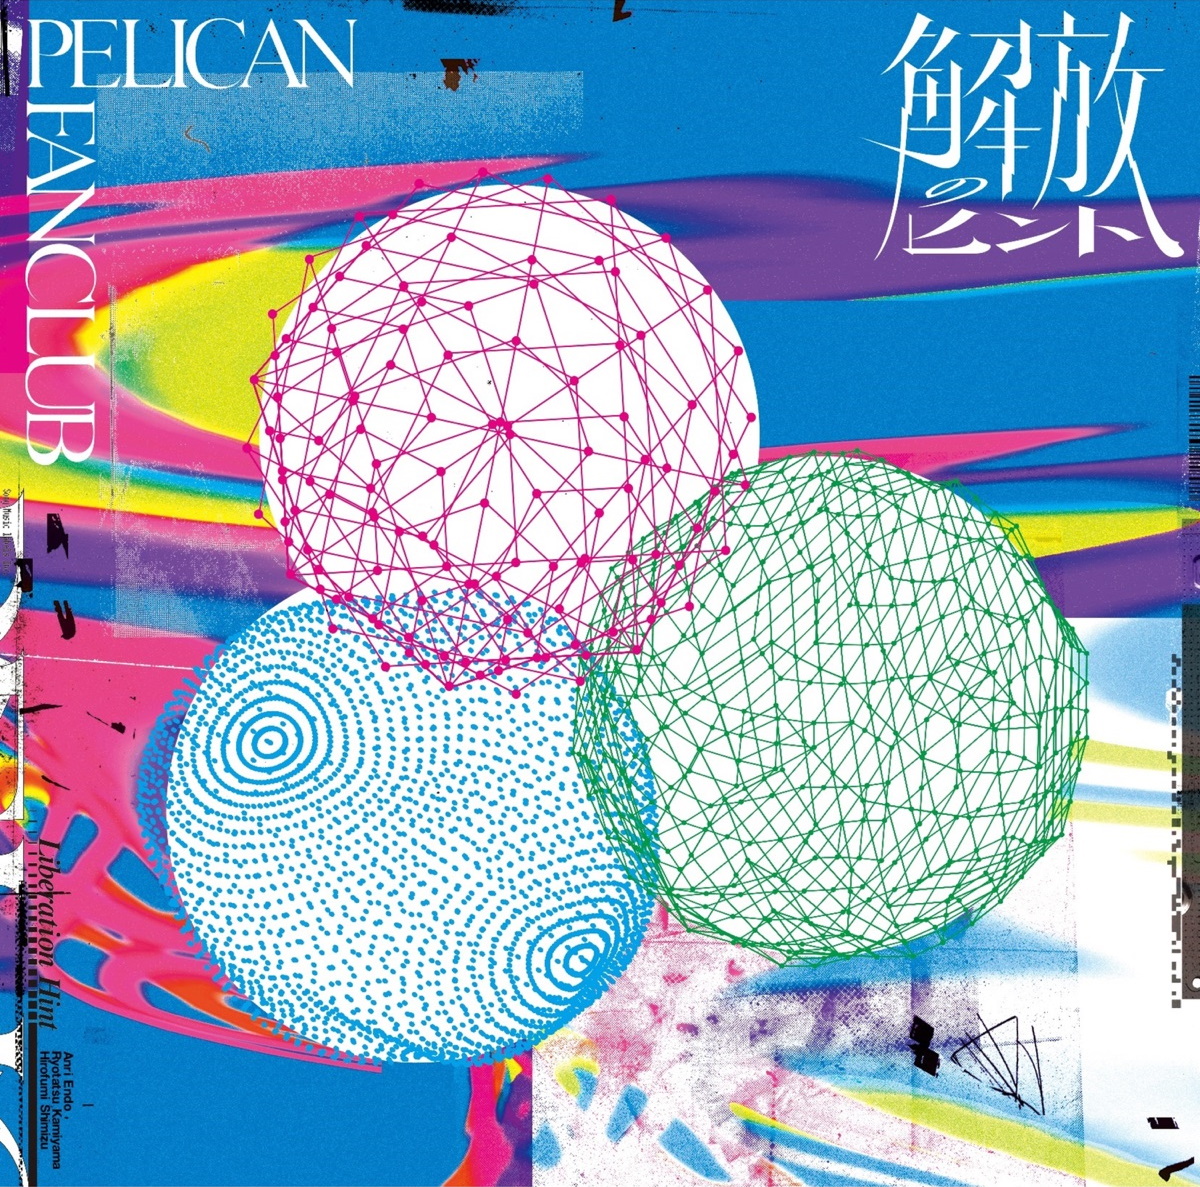 Cover art for『PELICAN FANCLUB - Astro Girl』from the release『Kaihou no Hint』